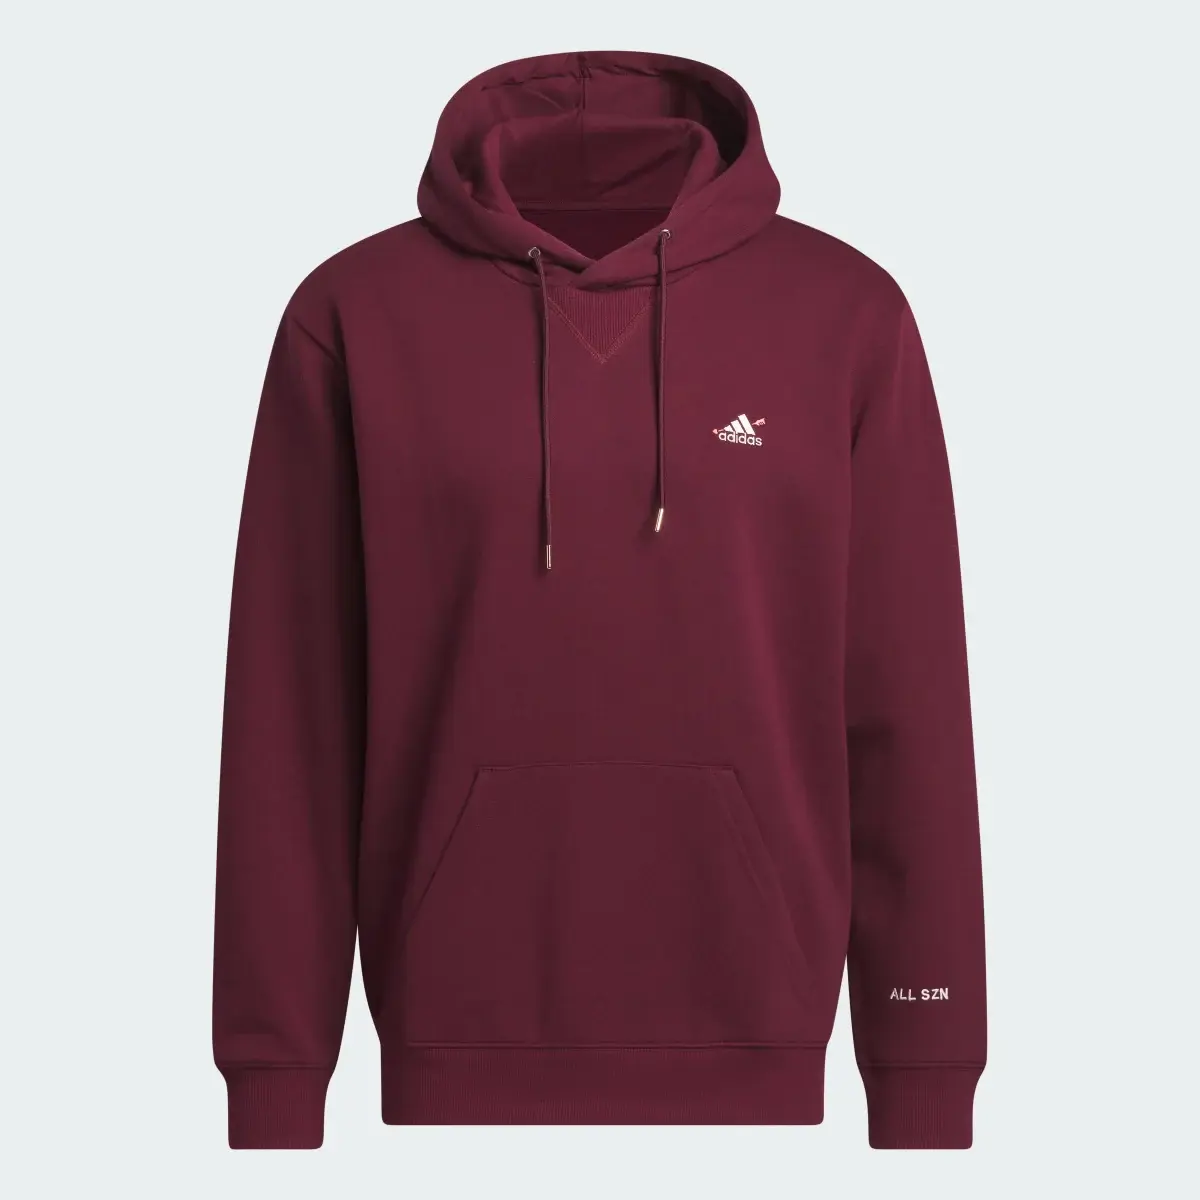 Adidas ALL SZN Valentine's Day Pullover Hoodie. 1